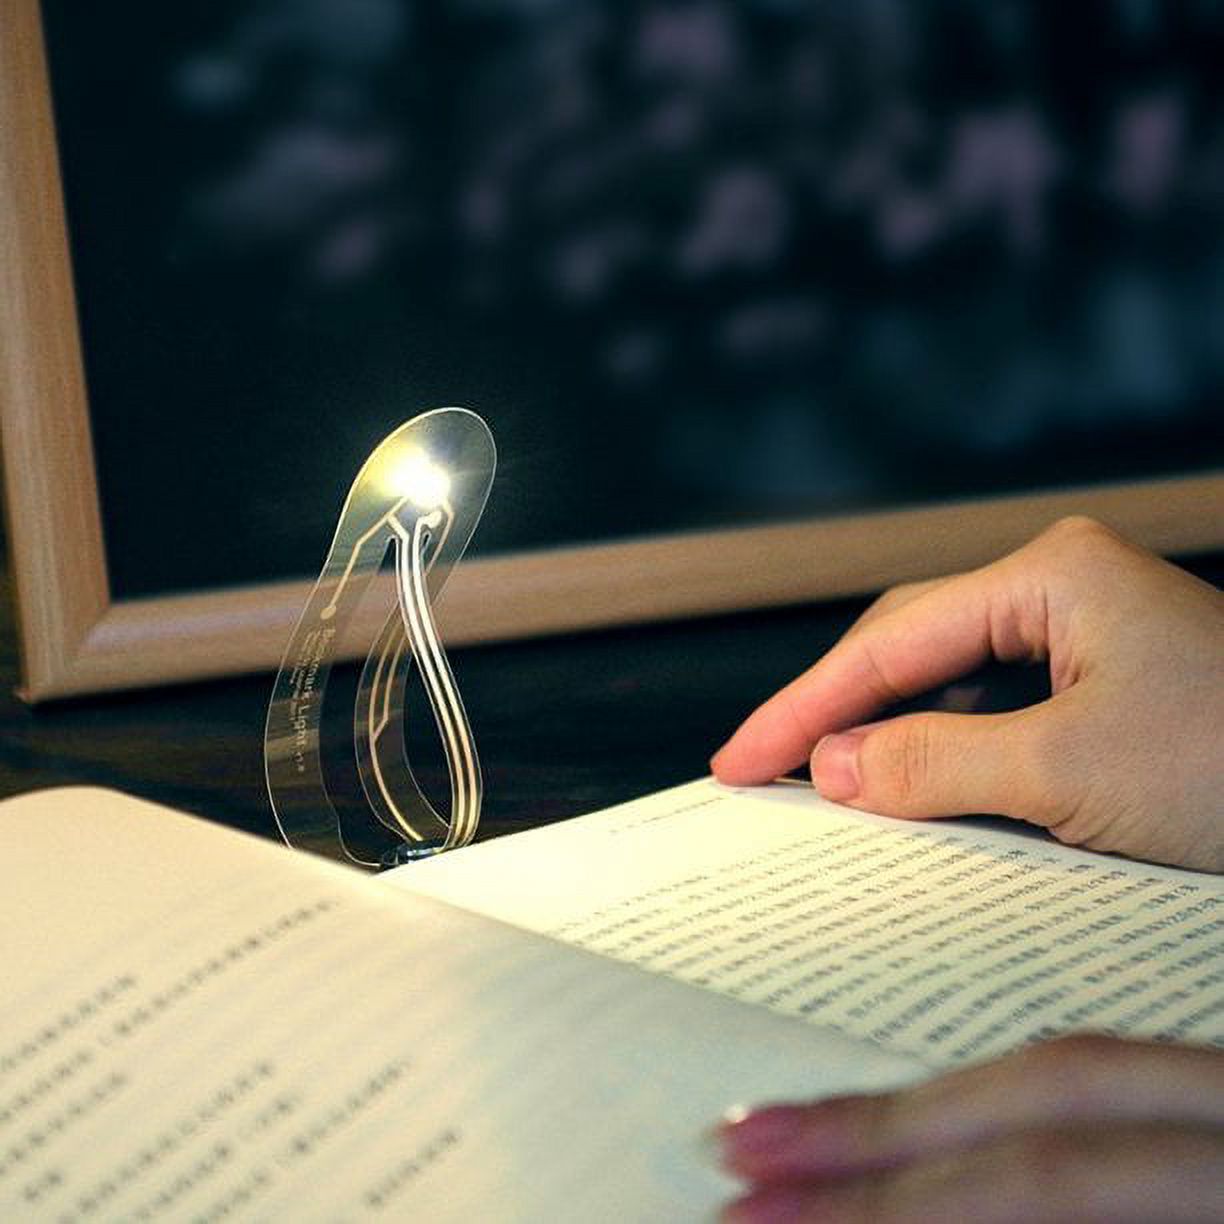 Simyoung Mini Book Light Ultra Bright Bookmark Night Lamp Flexible LED Book Reading Light Bedroom - image 2 of 5